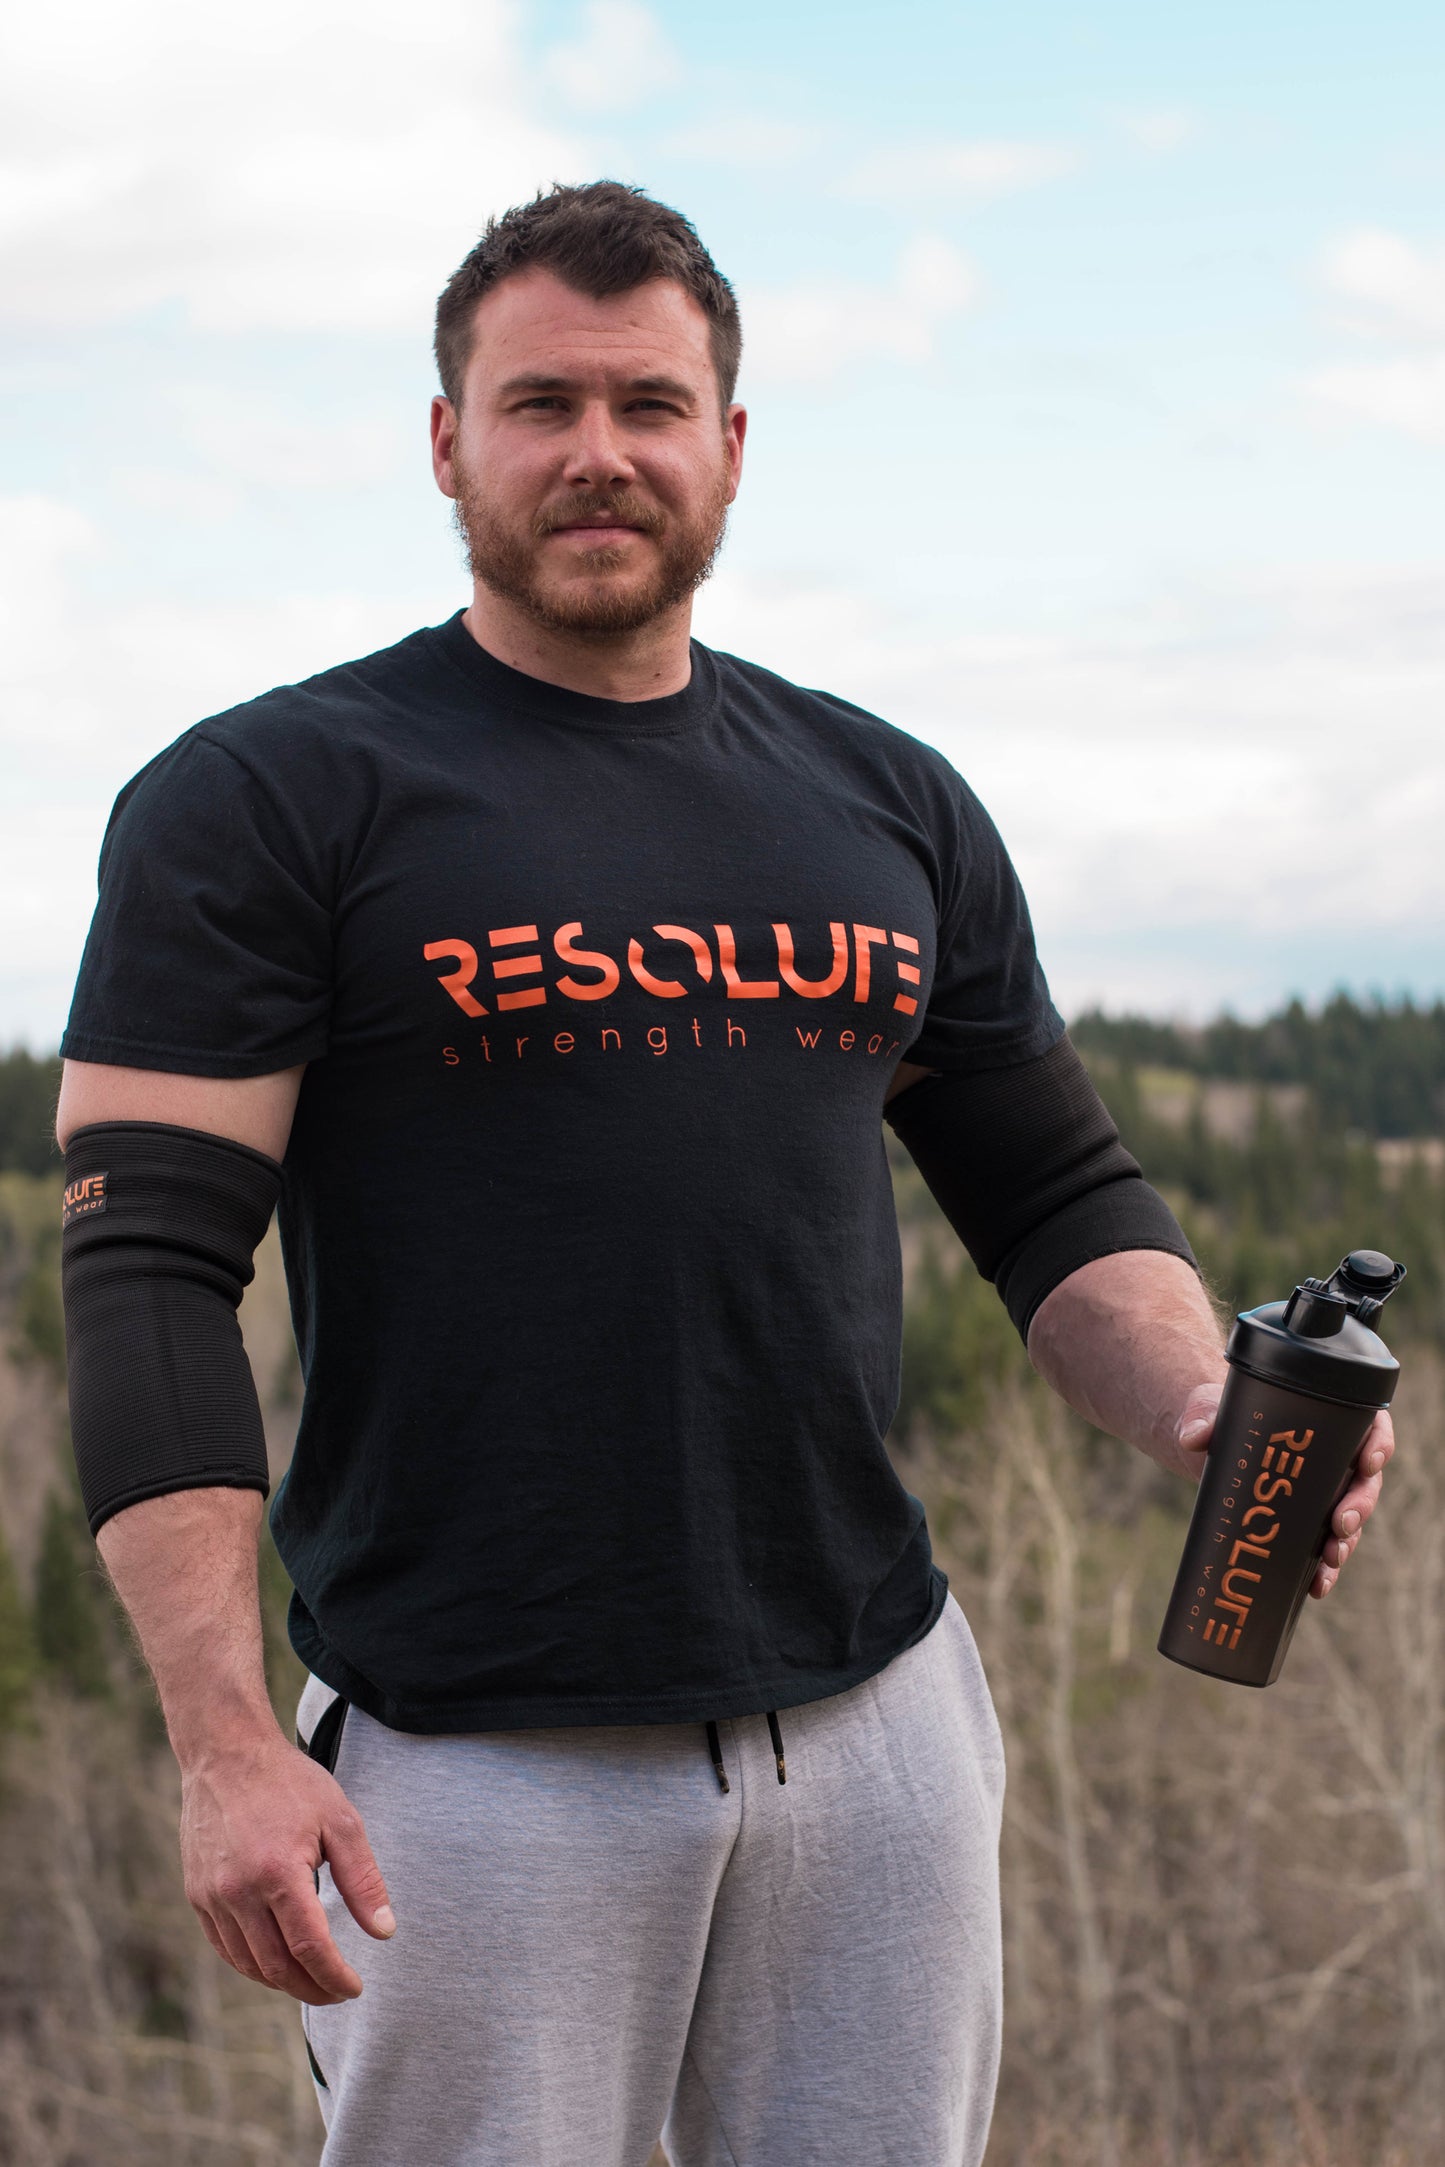 Elbow Sleeves - DOUBLE PLY - Resolute Strength Wear